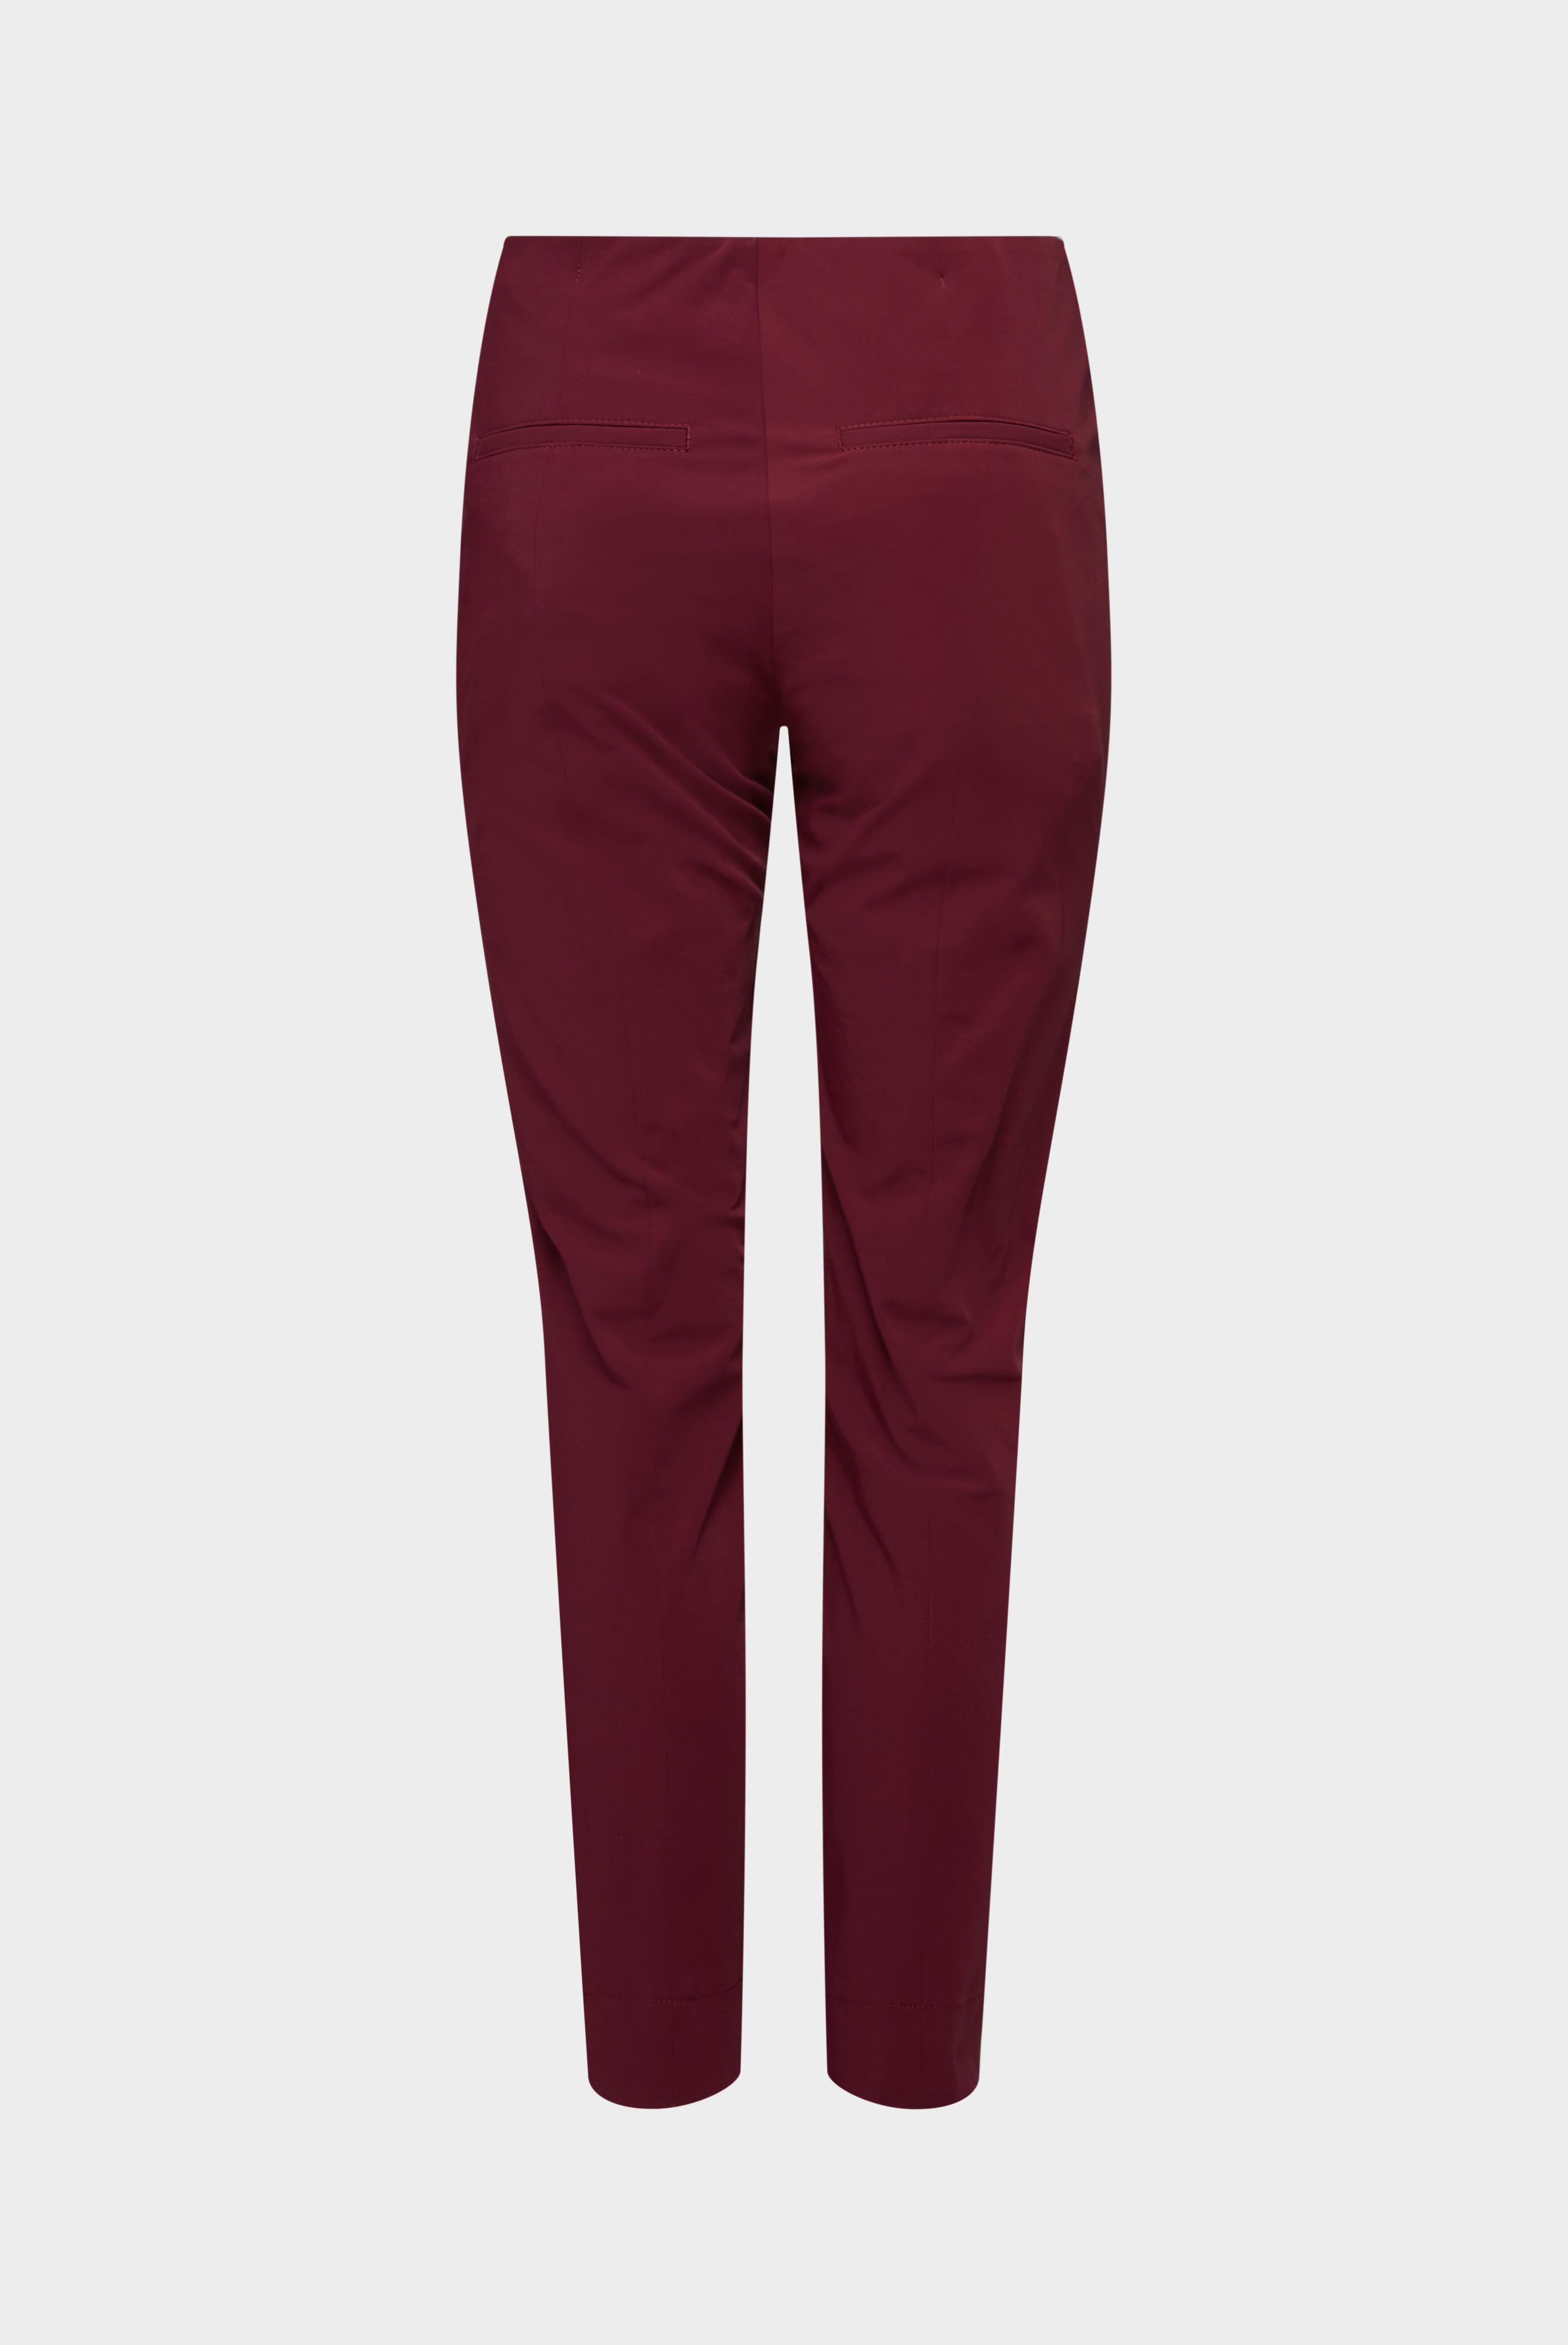 Jeans & Trousers+Trousers with Straiht Leg Slim Fit+04.635K..J00144.580.38